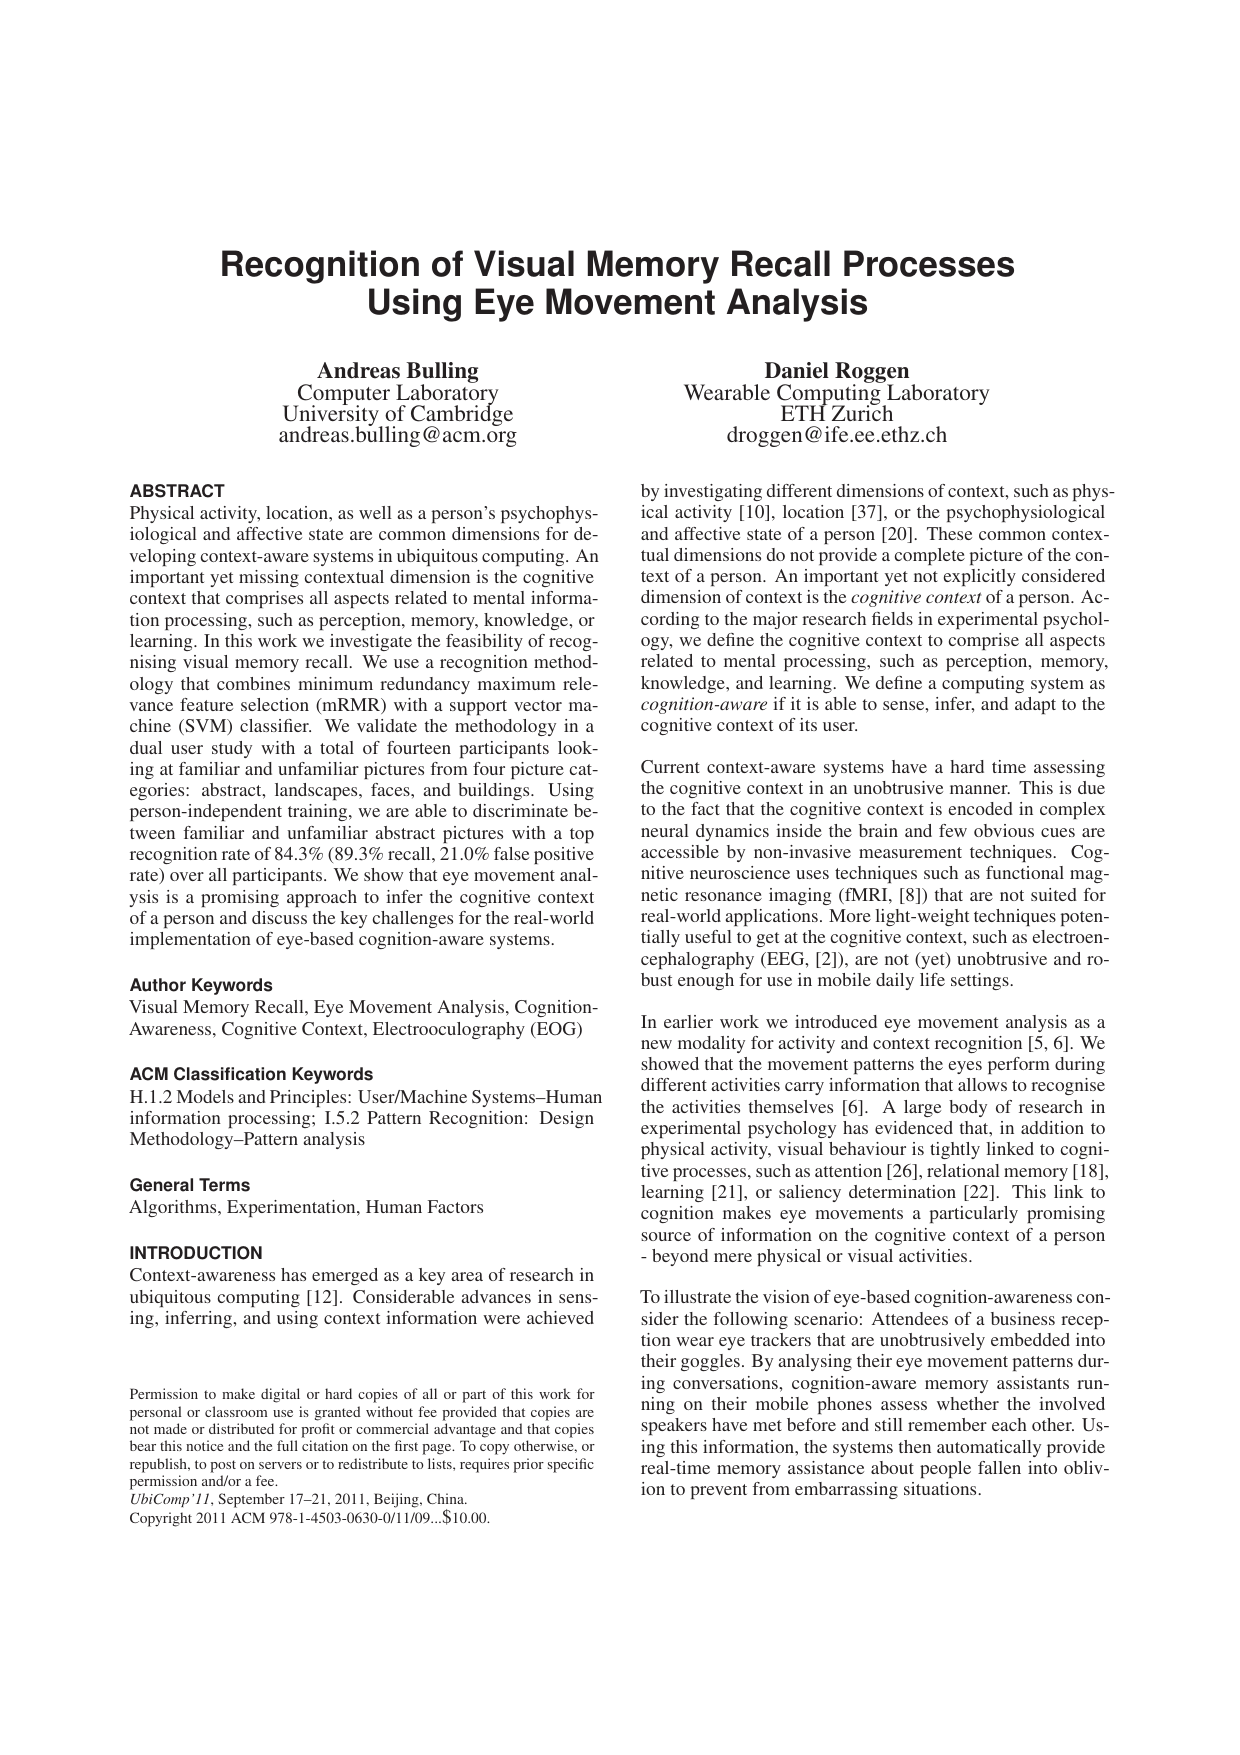 Recognition of Visual Memory Recall Processes Using Eye Movement Analysis